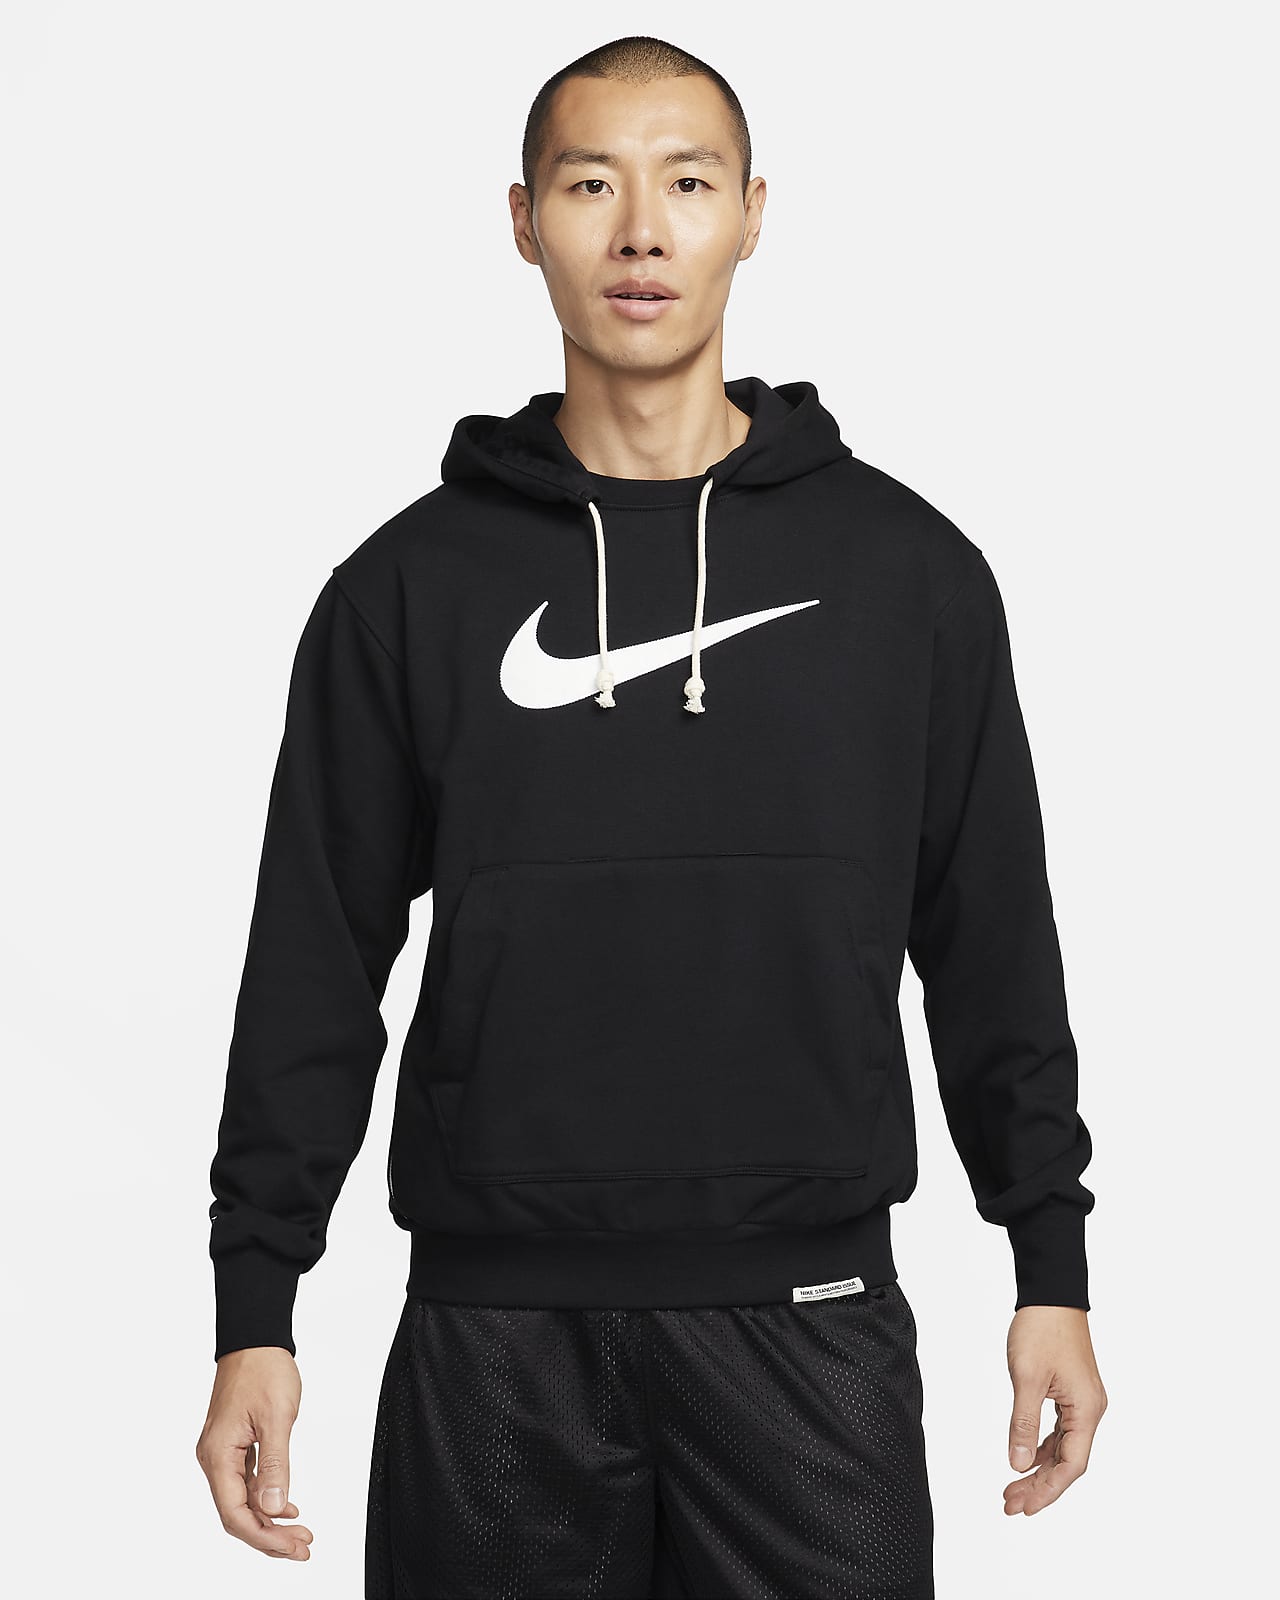 Nike Men's Dri-FIT Standard Issue Pullover Basketball Hoodie, Small, Black